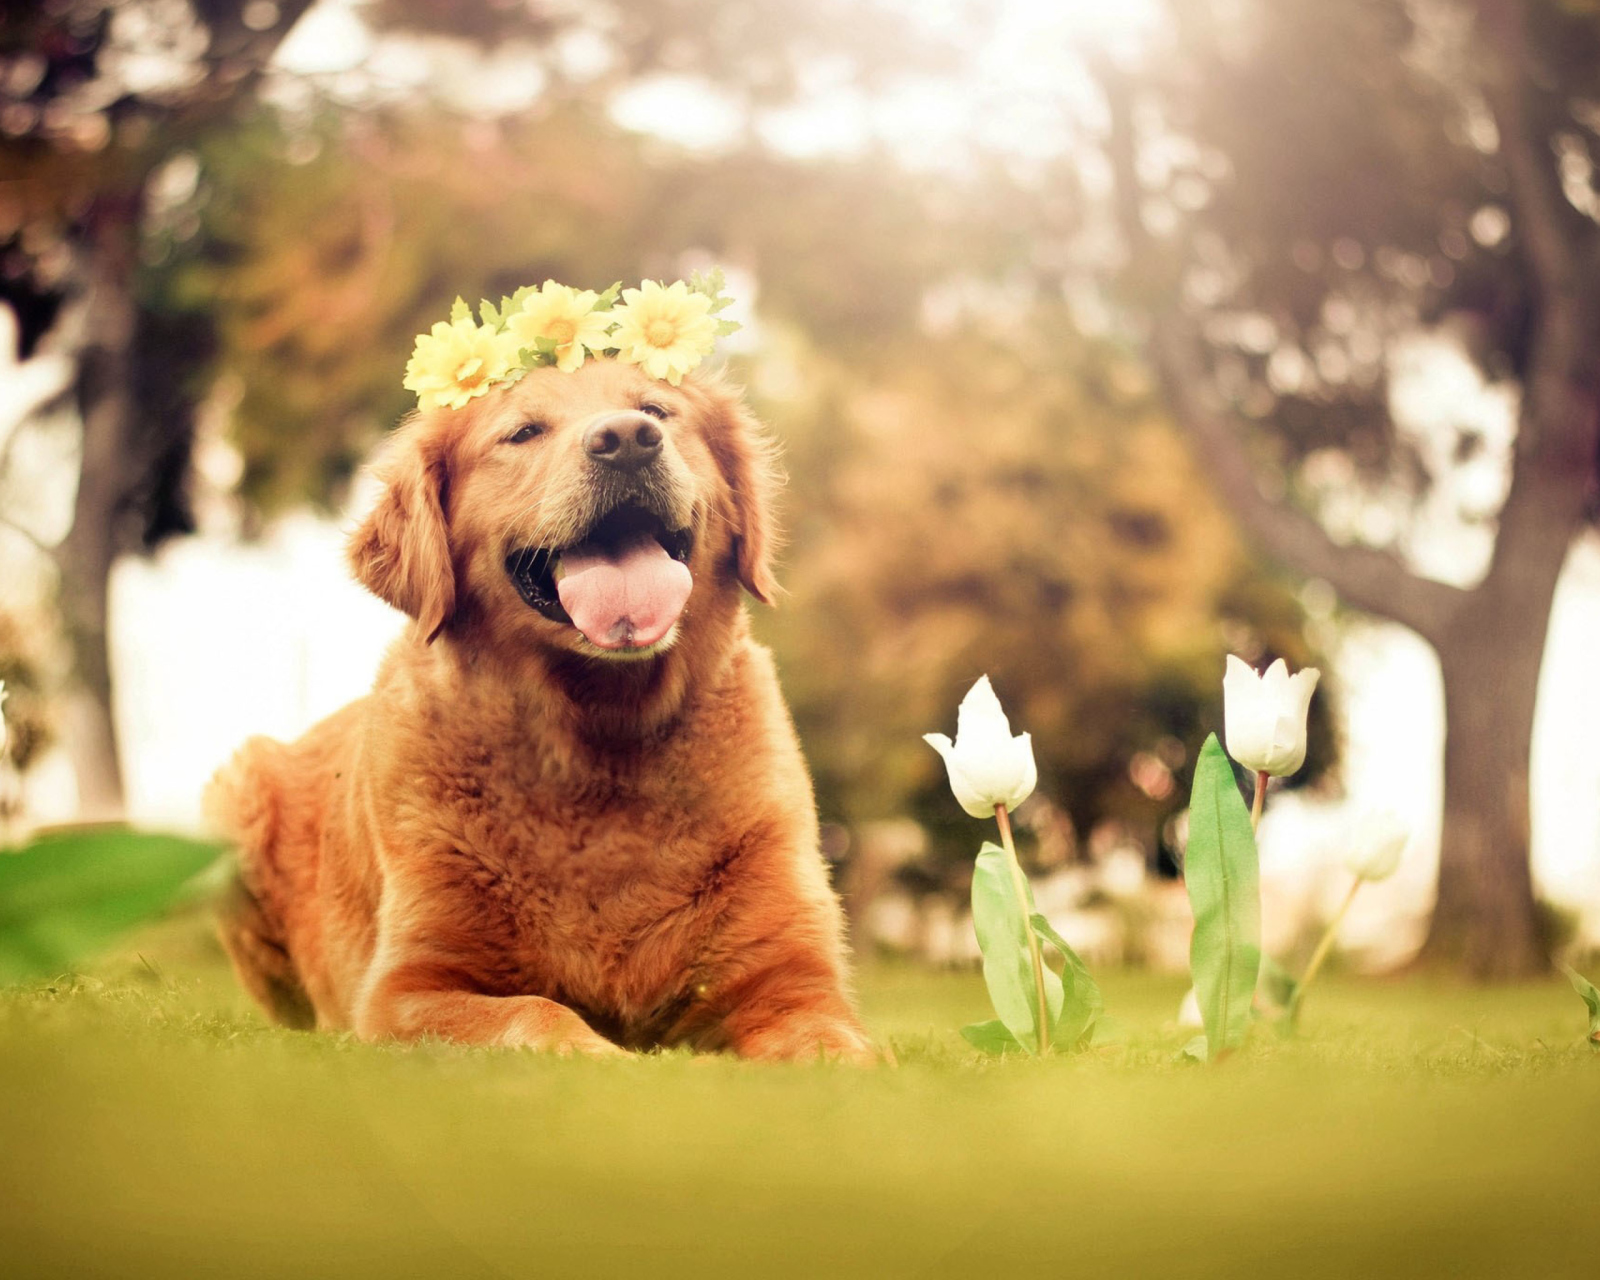 Ginger Dog With Flower Wreath wallpaper 1600x1280